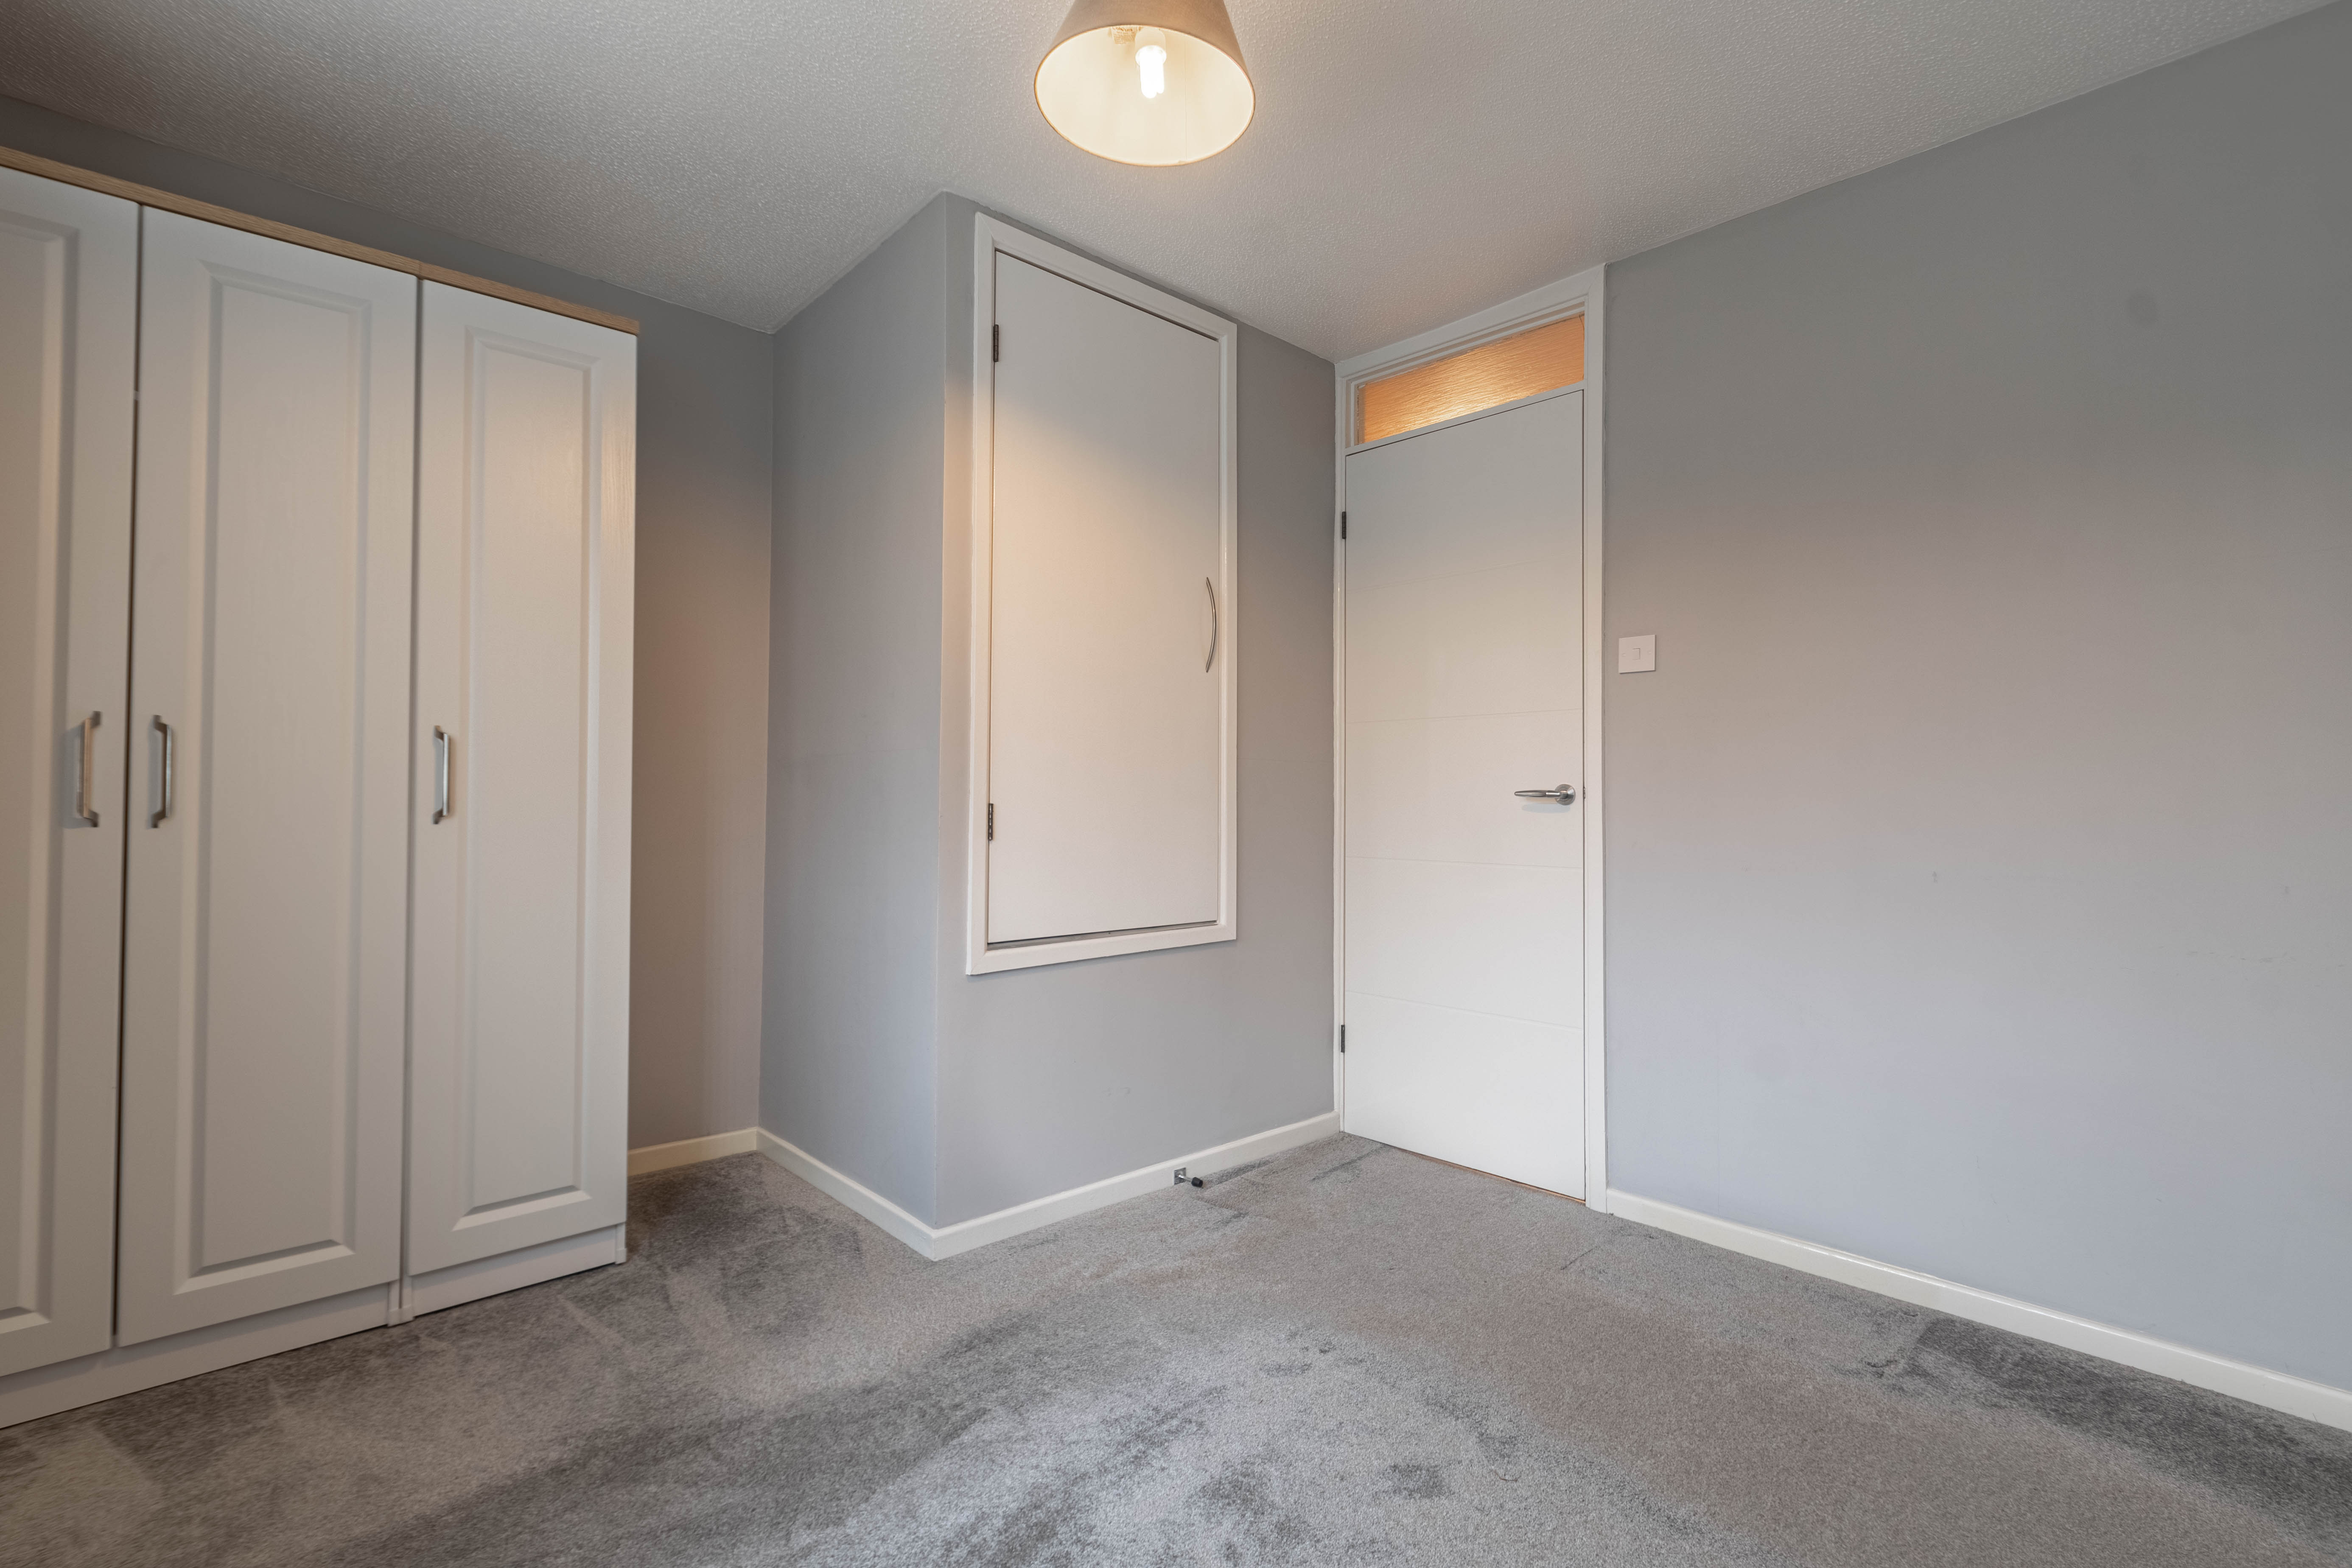 2 bed house for sale in Abbotswood Close, Winyates Green 8